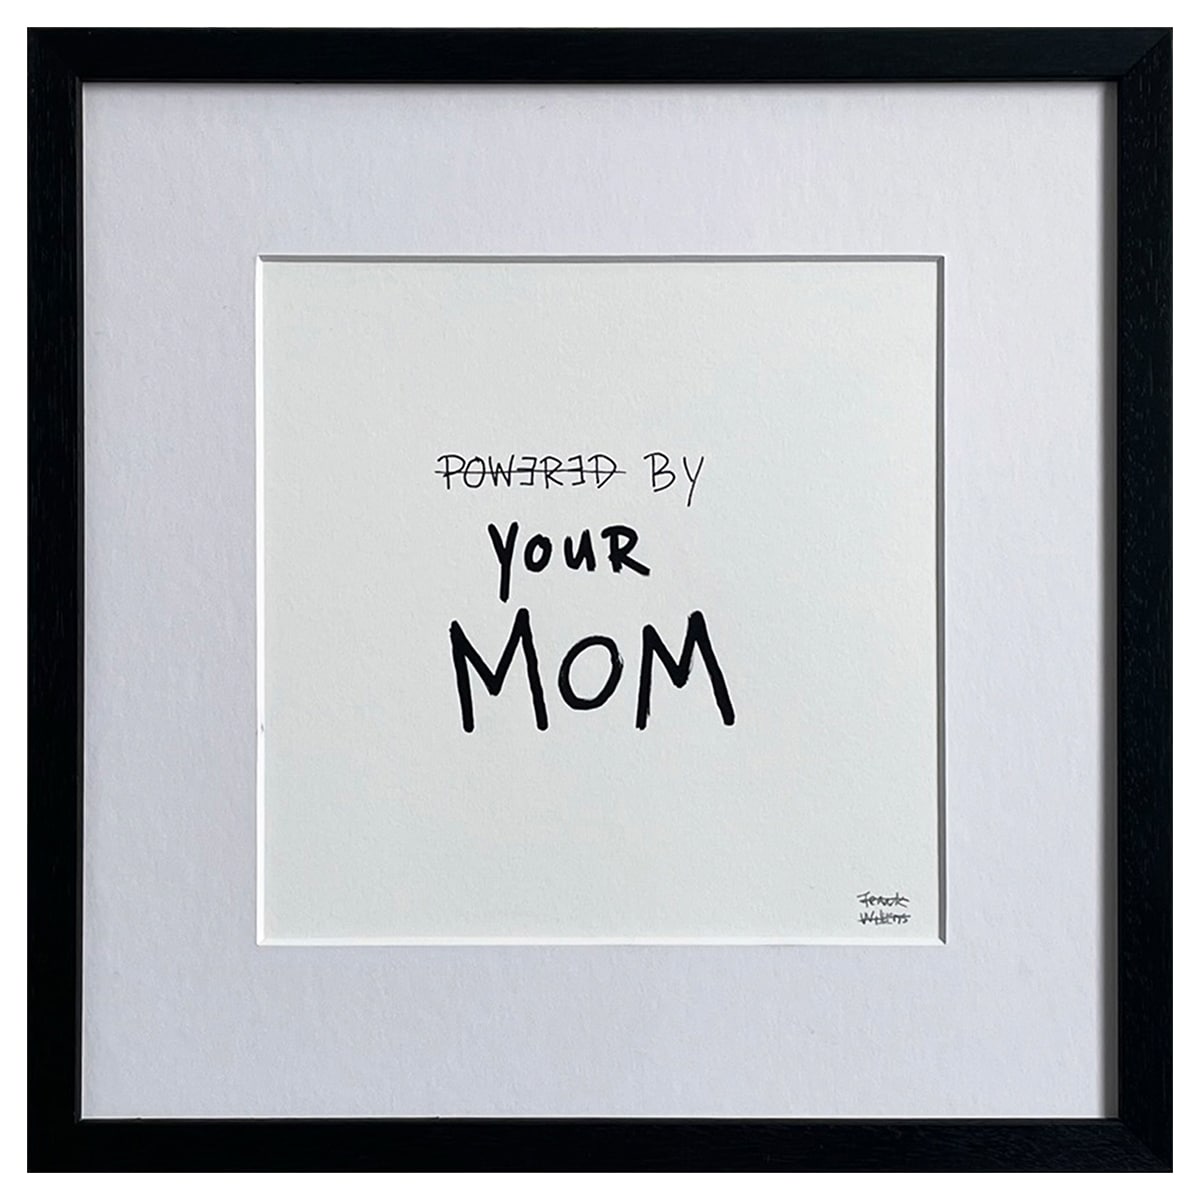 Limited Edt. Text Print – POWERED BY YOUR MOM